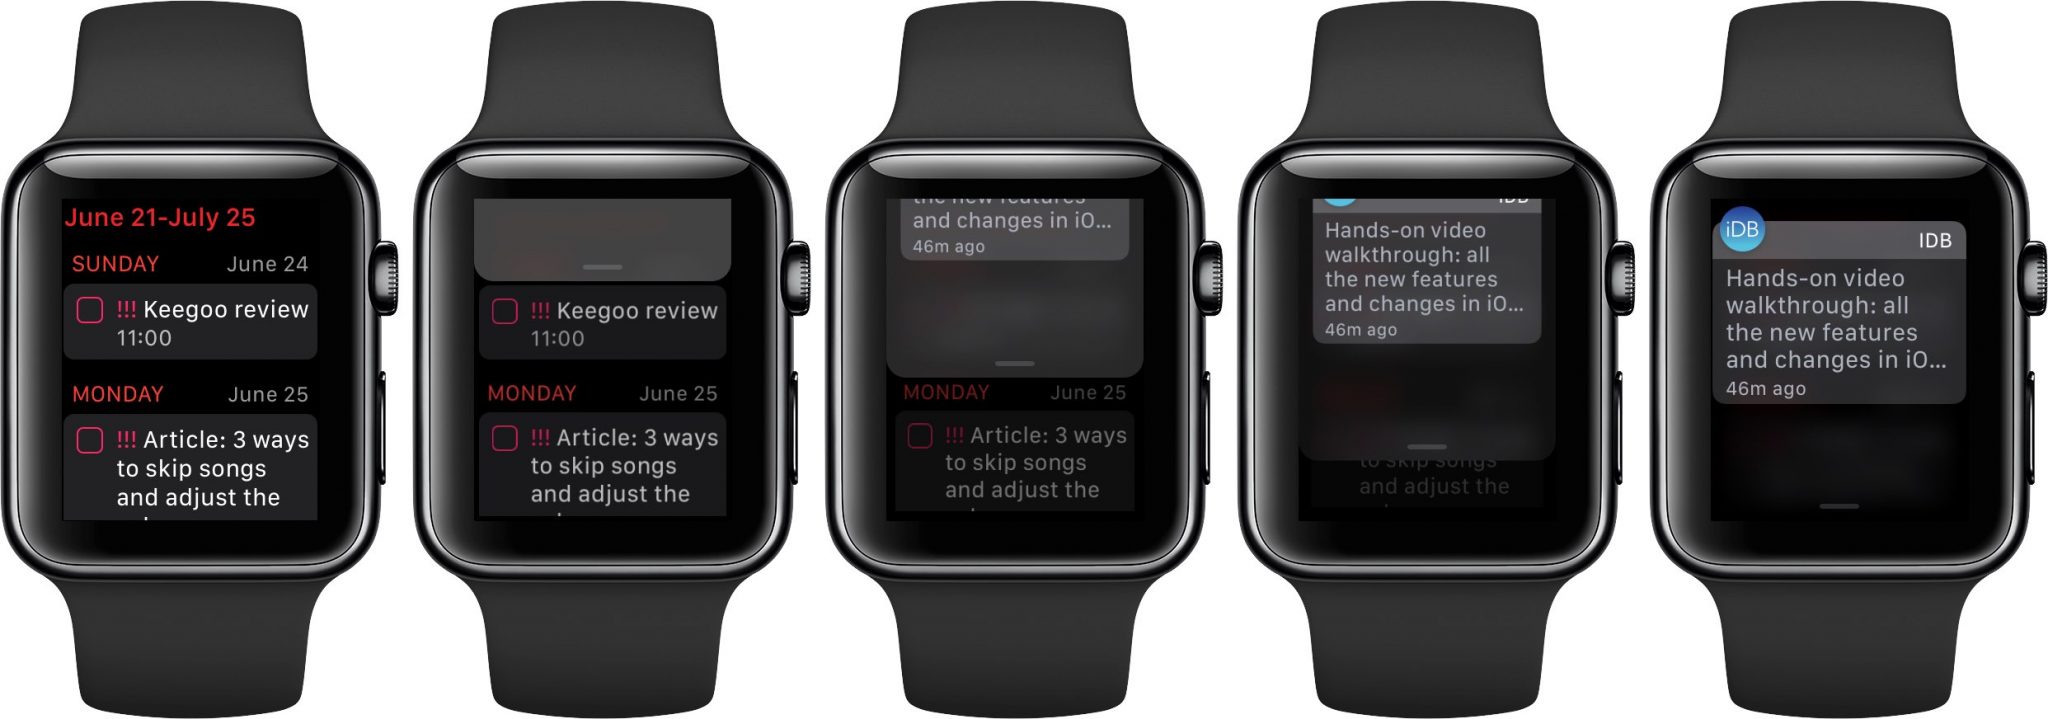 How to open Control Center and Action Center from apps on Apple Watch